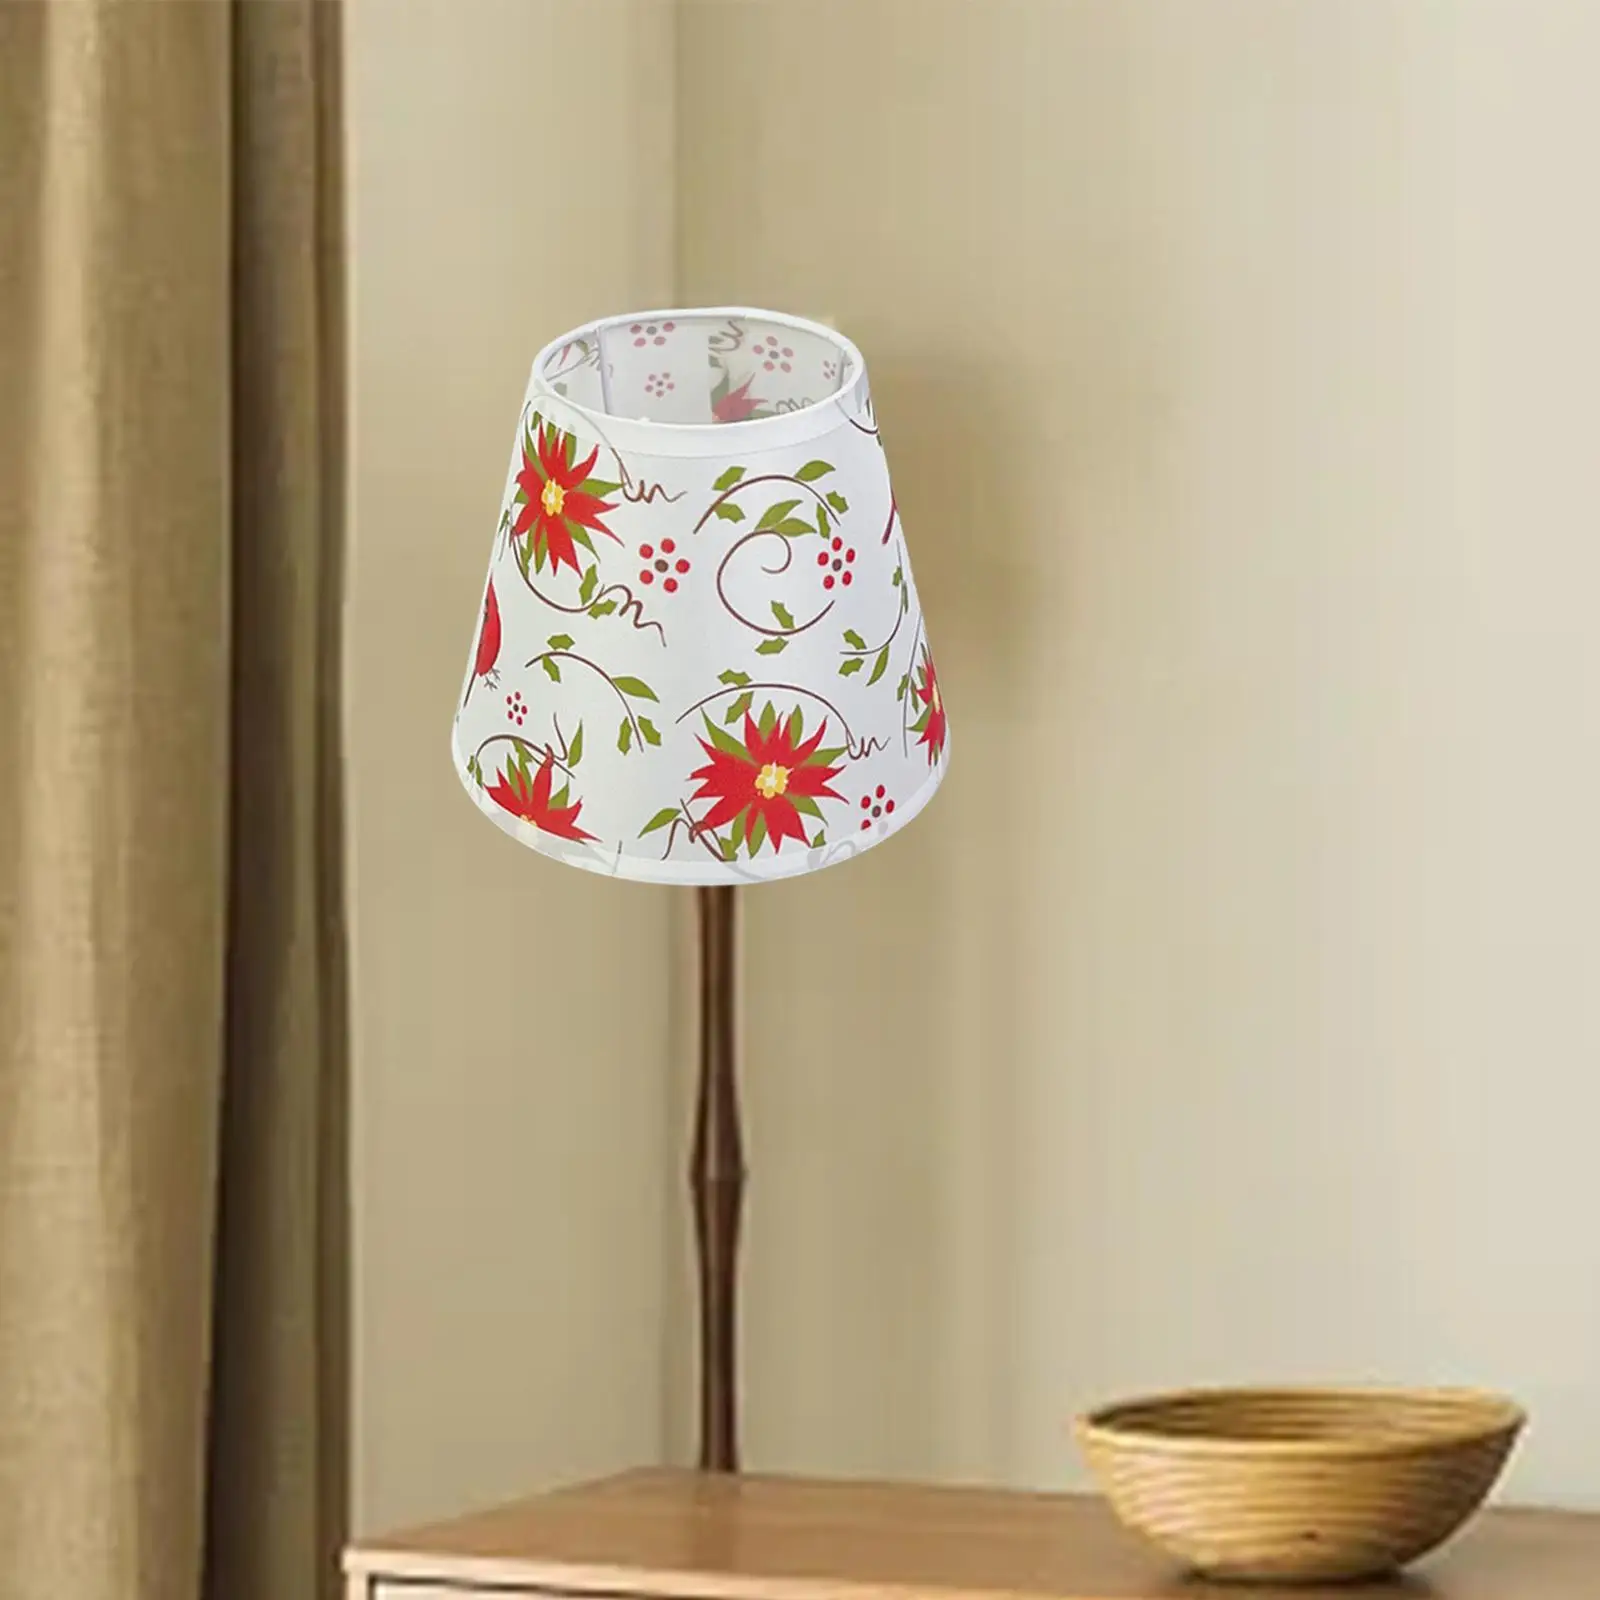 Lampshade Dome Lamp Shade for Table Floor Pendant Lamp Cloth Lamp Shade E14 Base for Bedroom Home Office Restaurant Dining Room